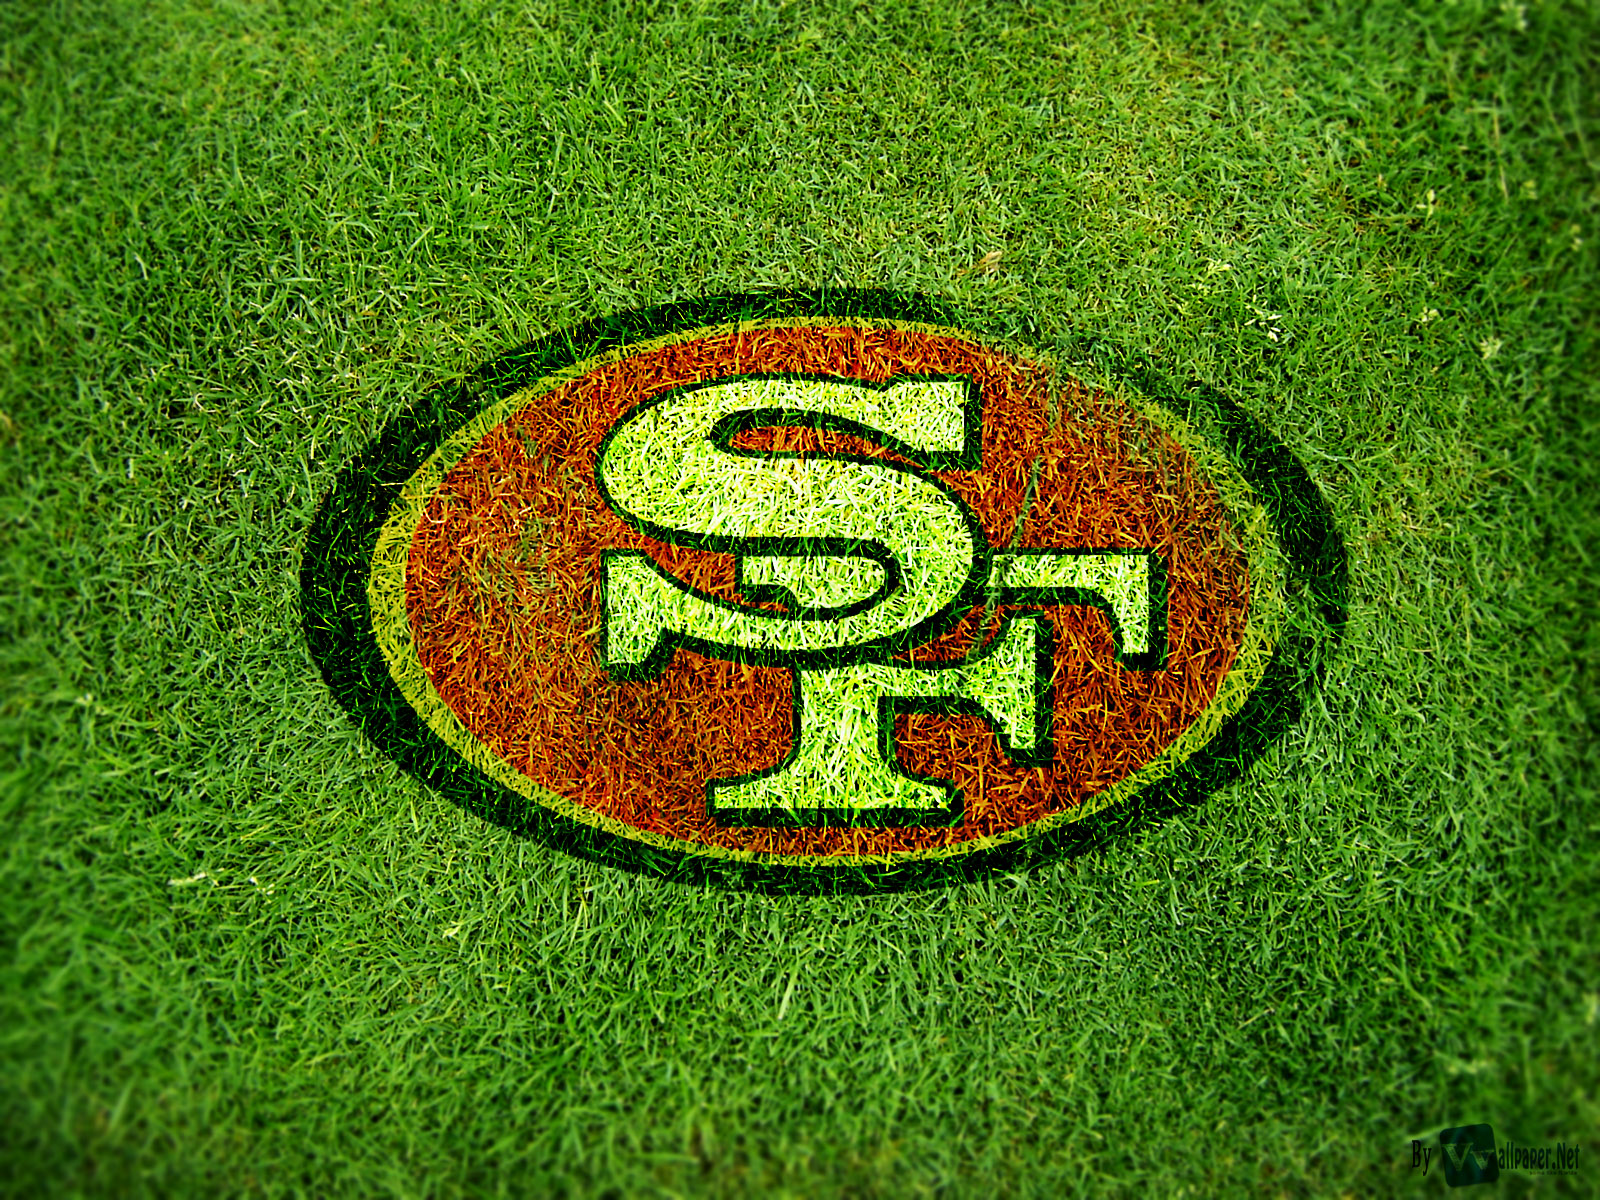 49ers wallpapers HD HD Wallpapers Backgrounds Photos